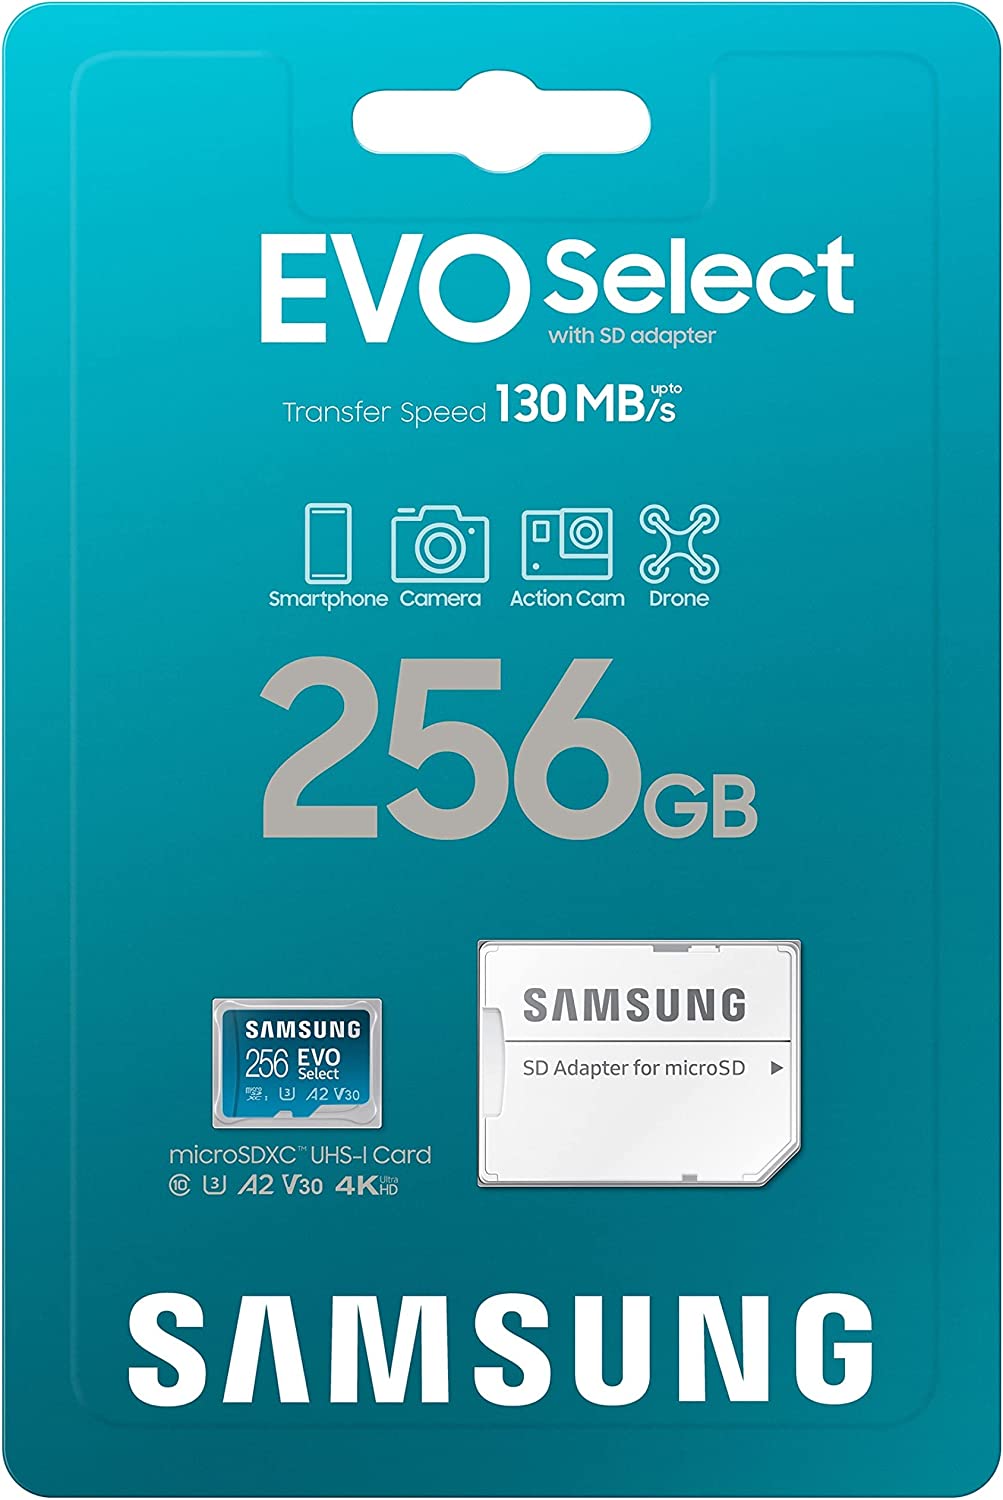 This deal gets you a 256GB Samsung EVO Select micro SD card for just $19